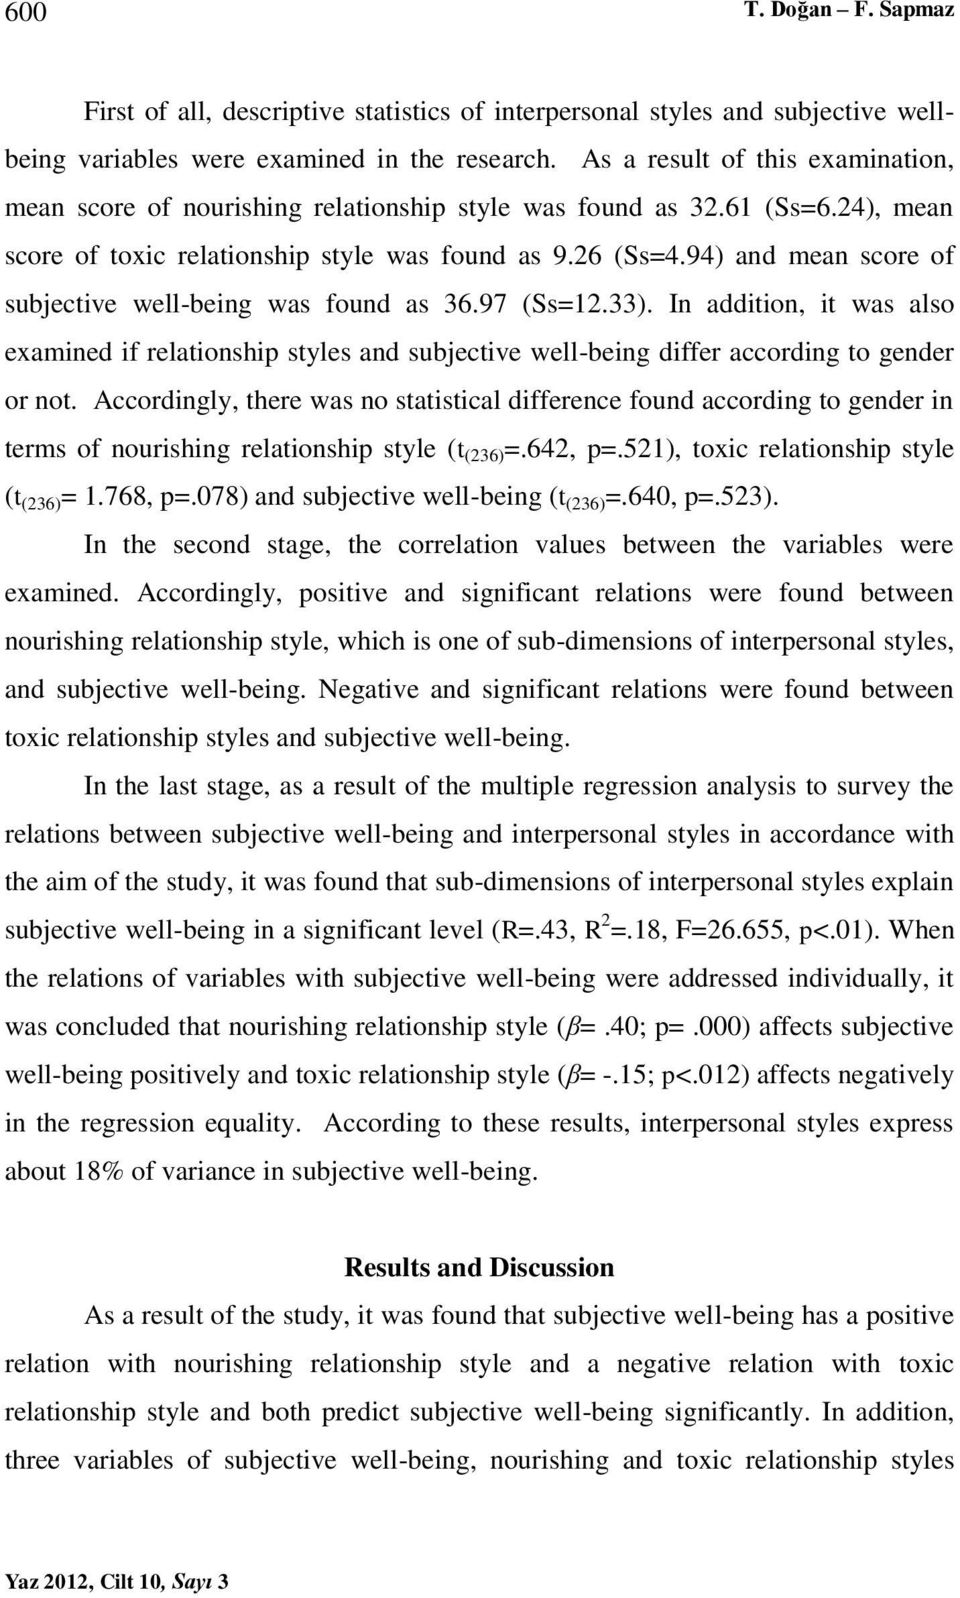 94) and mean score of subjective well-being was found as 36.97 (Ss=12.33). In addition, it was also examined if relationship styles and subjective well-being differ according to gender or not.